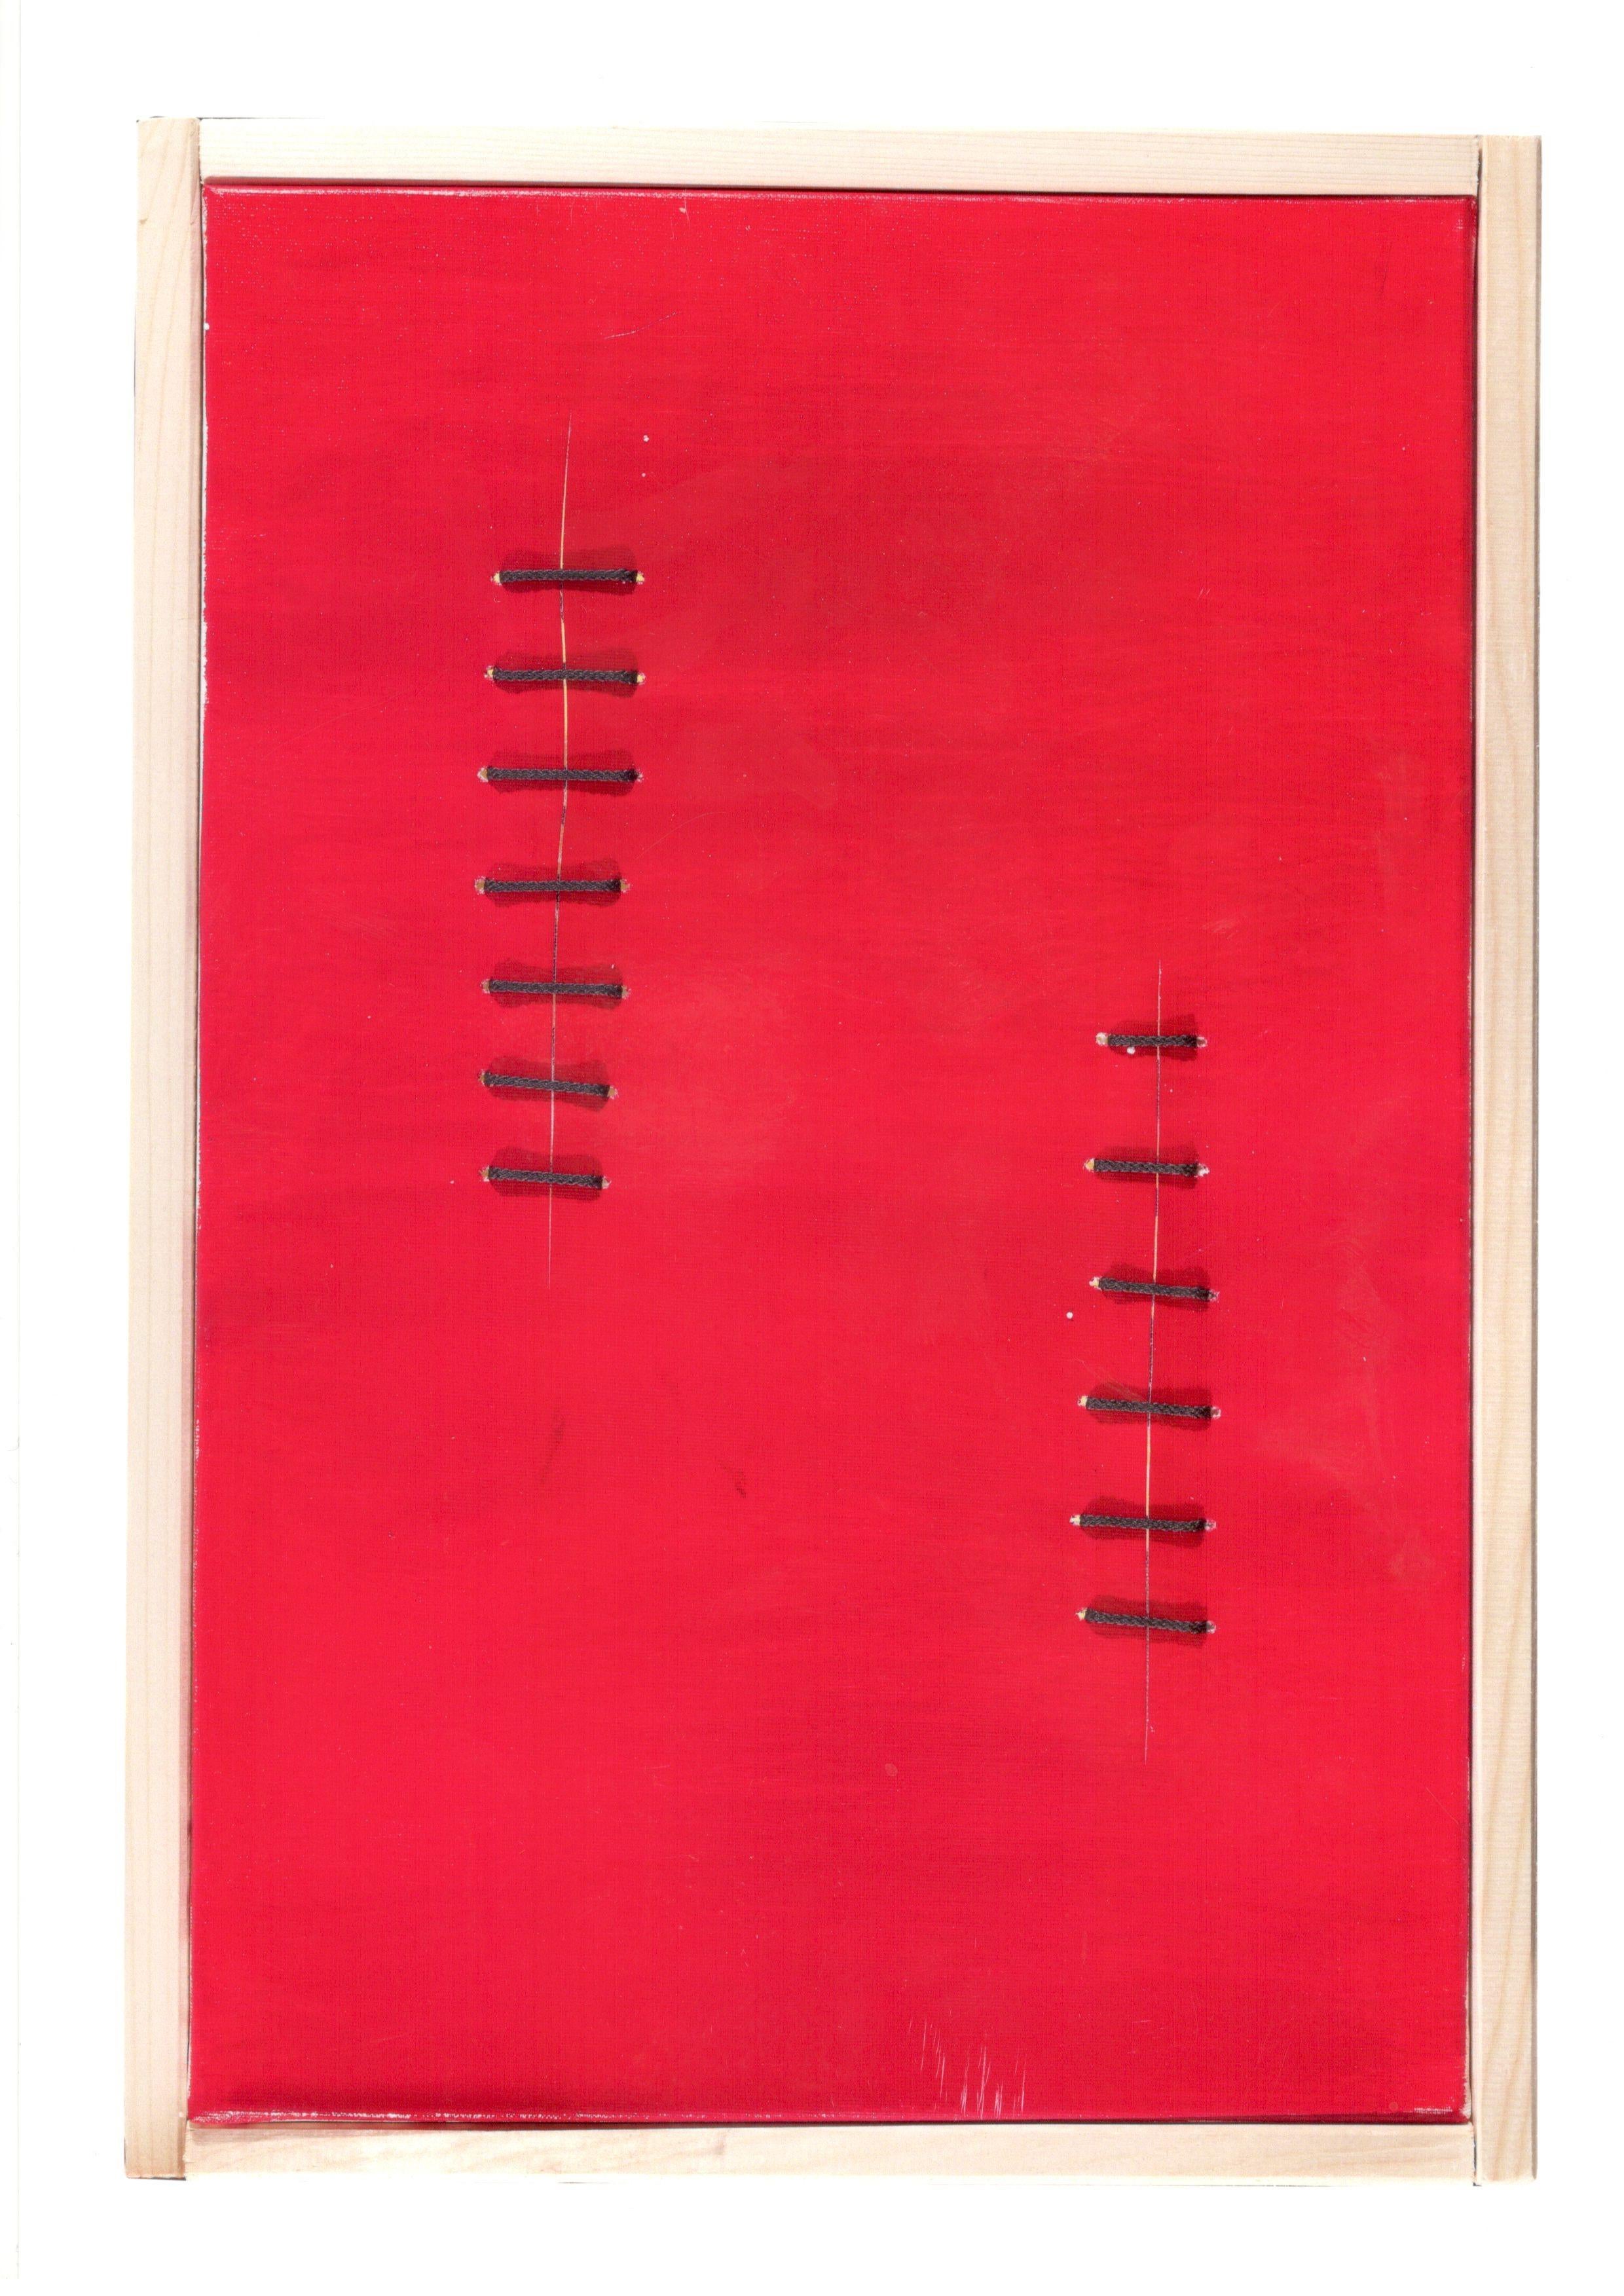 Seams on Red is an original artwork realized by the Italian contemporary artist Mario Bigetti in 2019.

Acrylic painting on canvas, twine and seams.

A minimal wood frame is included.

Perfect conditions.

The artwork is realized with a red acrylic